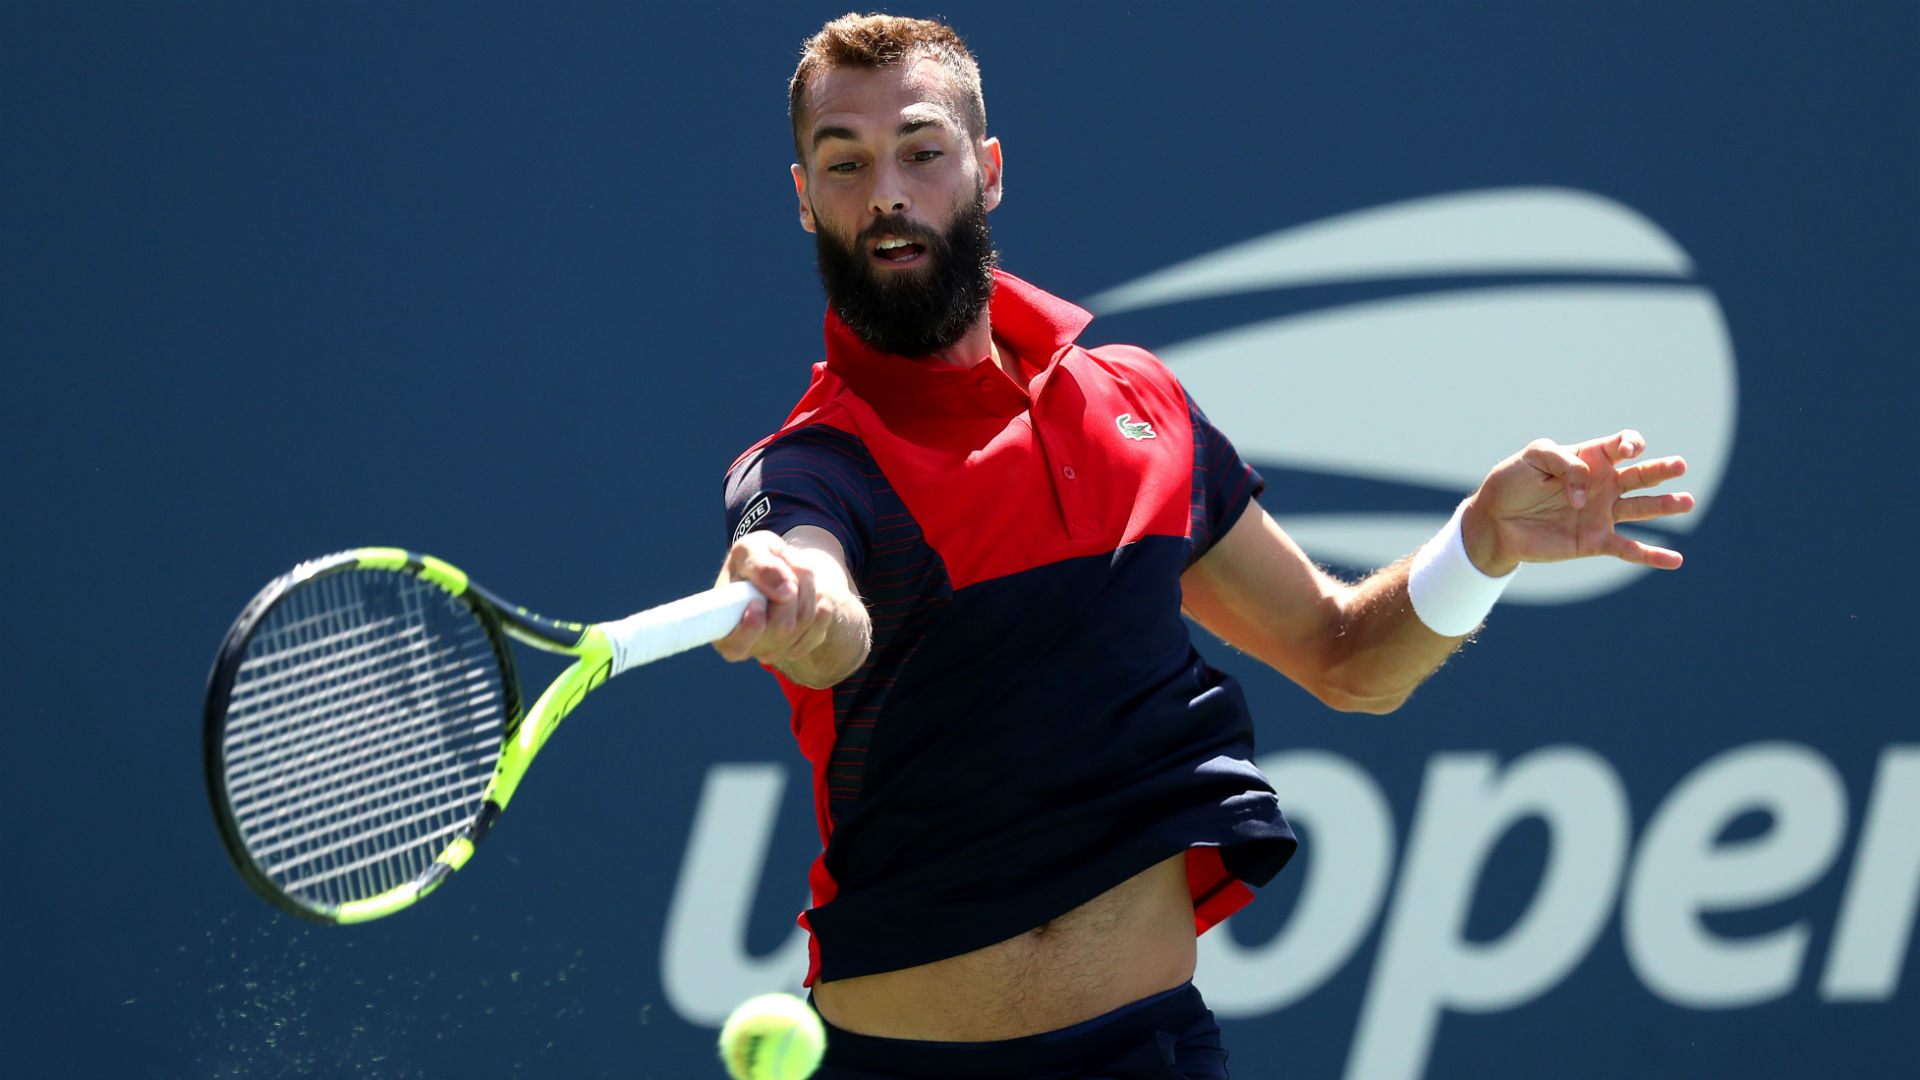 Richard Gasquet lost for just the second time in nine career meetings with Benoit Paire in an-all French clash in Metz.